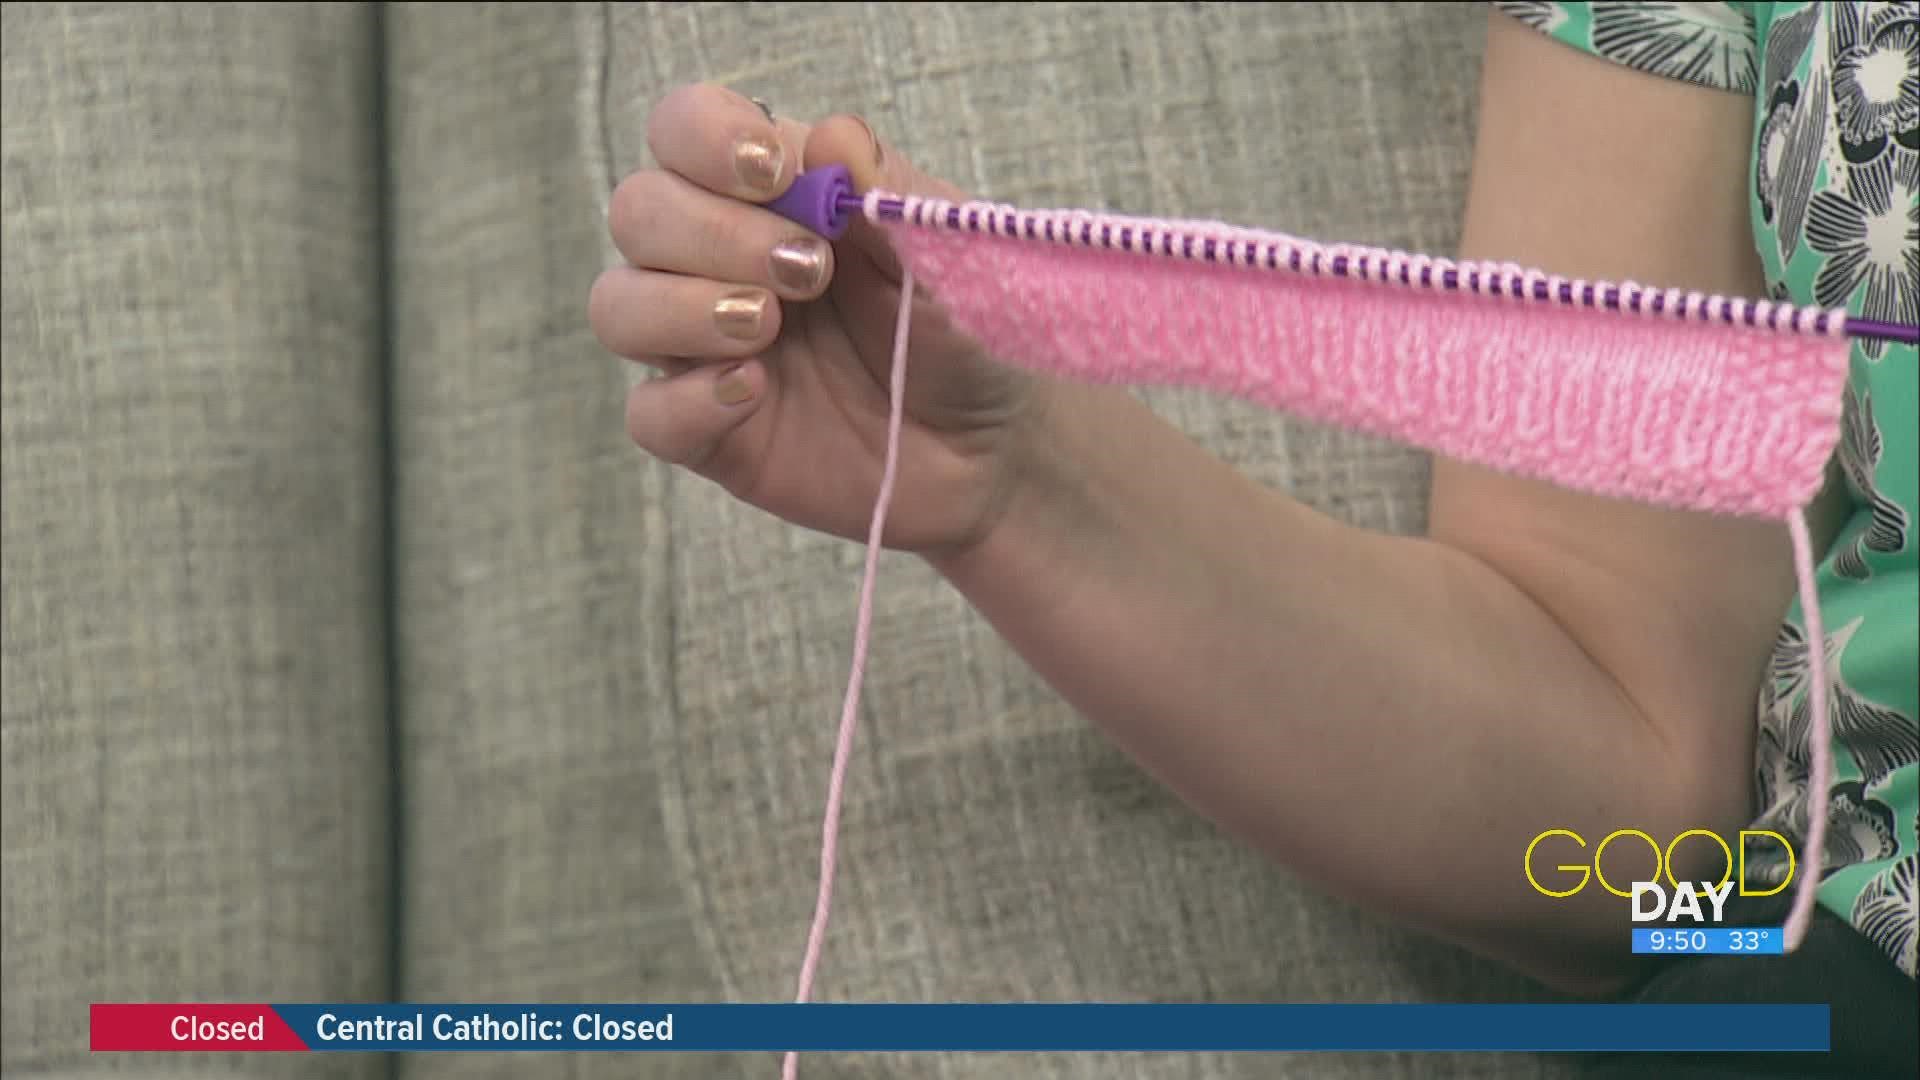 Amanda and Diane start new knitting projects, including the beginnings of a tie for Steven.